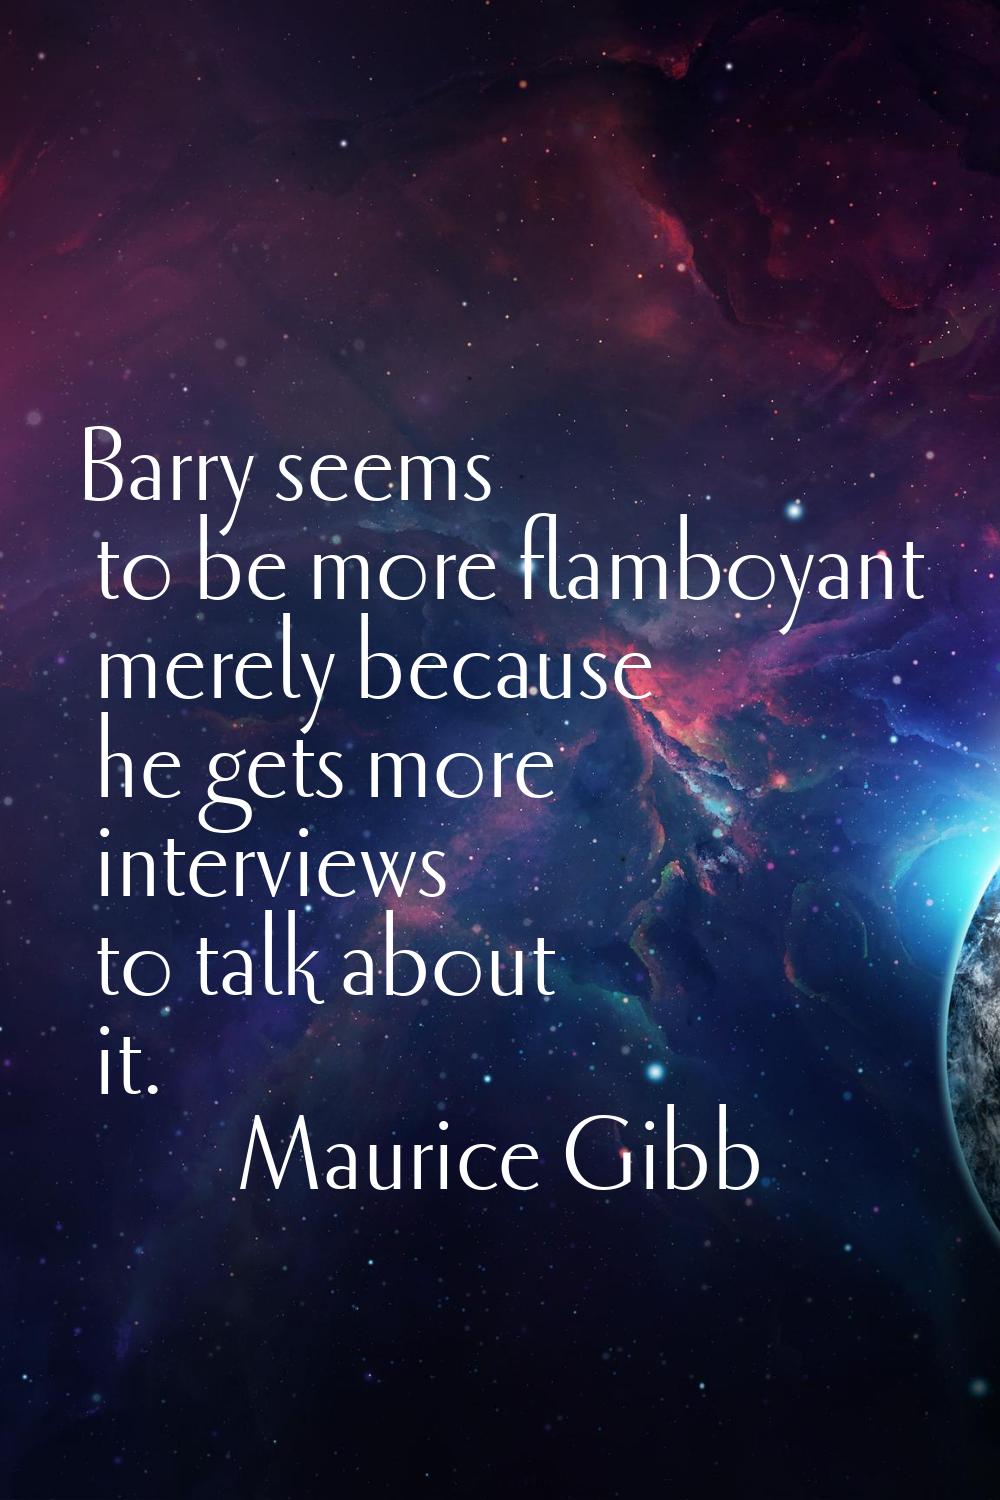 Barry seems to be more flamboyant merely because he gets more interviews to talk about it.